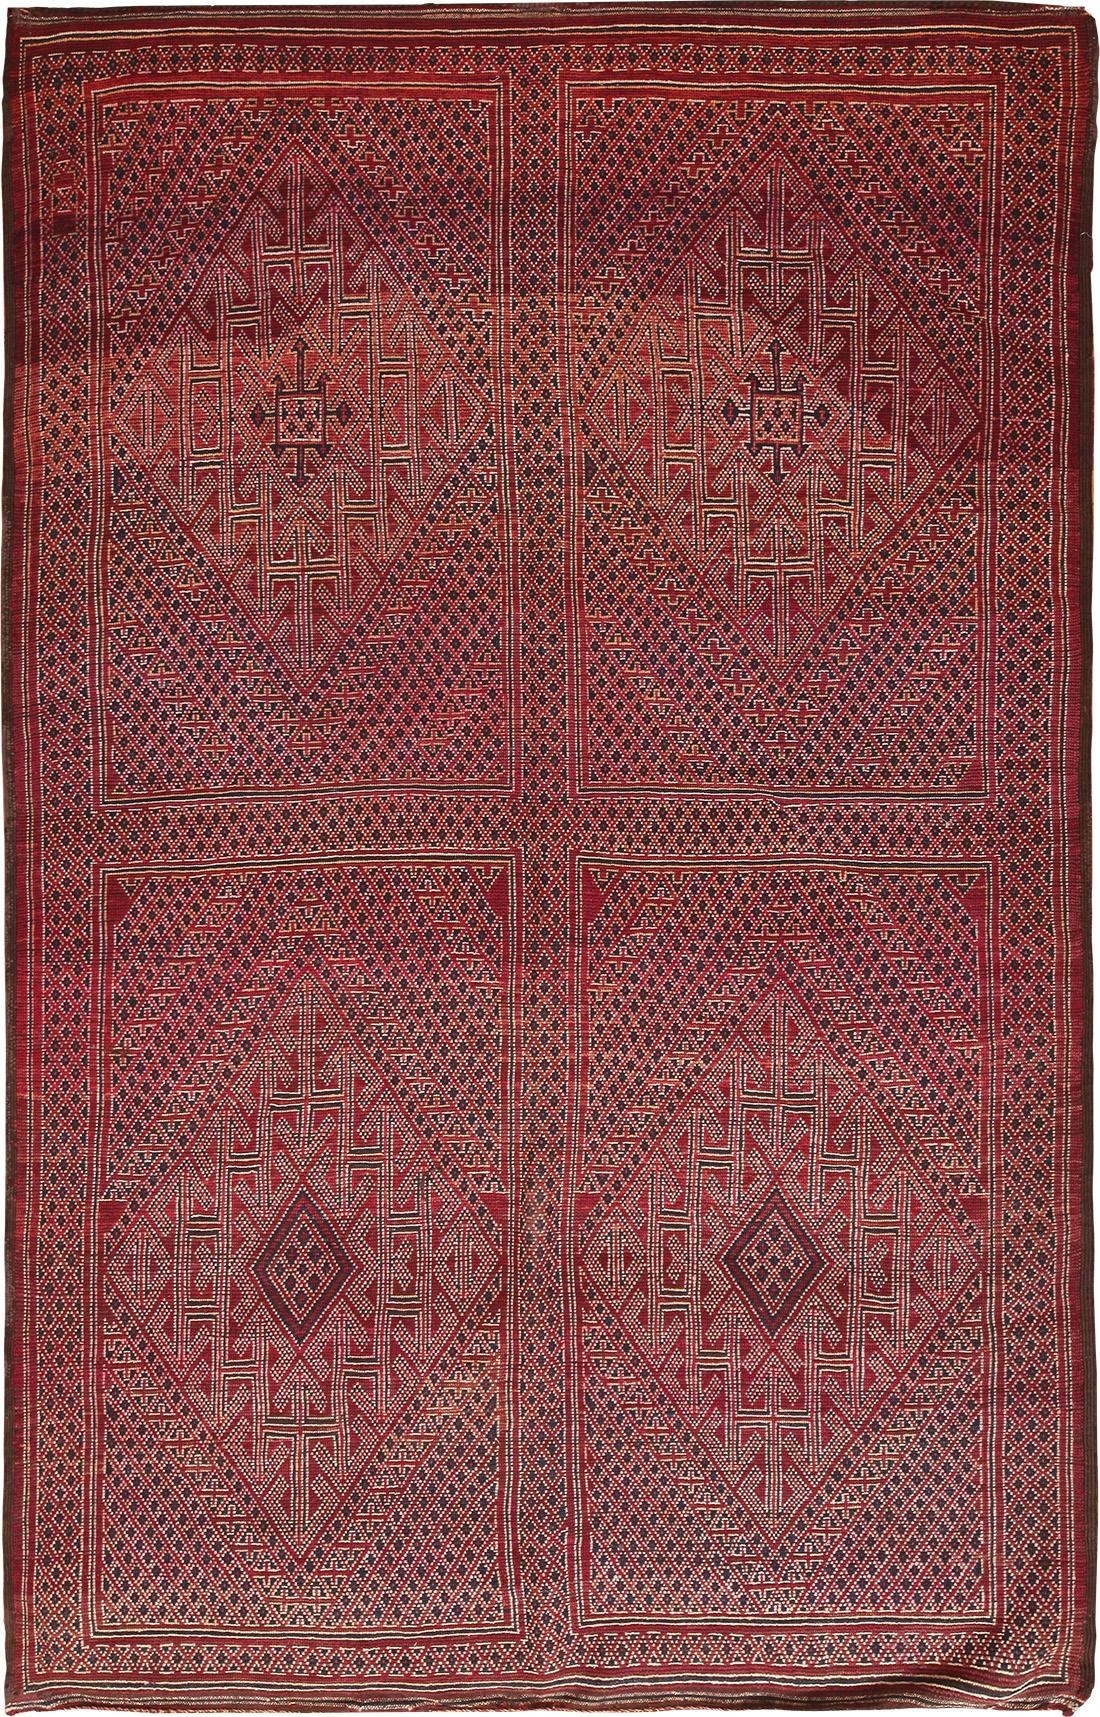 Beautiful vintage red Moroccan rug, country of origin: Morocco, date circa mid-20th century. Size: 5 ft 7 in x 10 ft 10 in (1.7 m x 3.3 m).